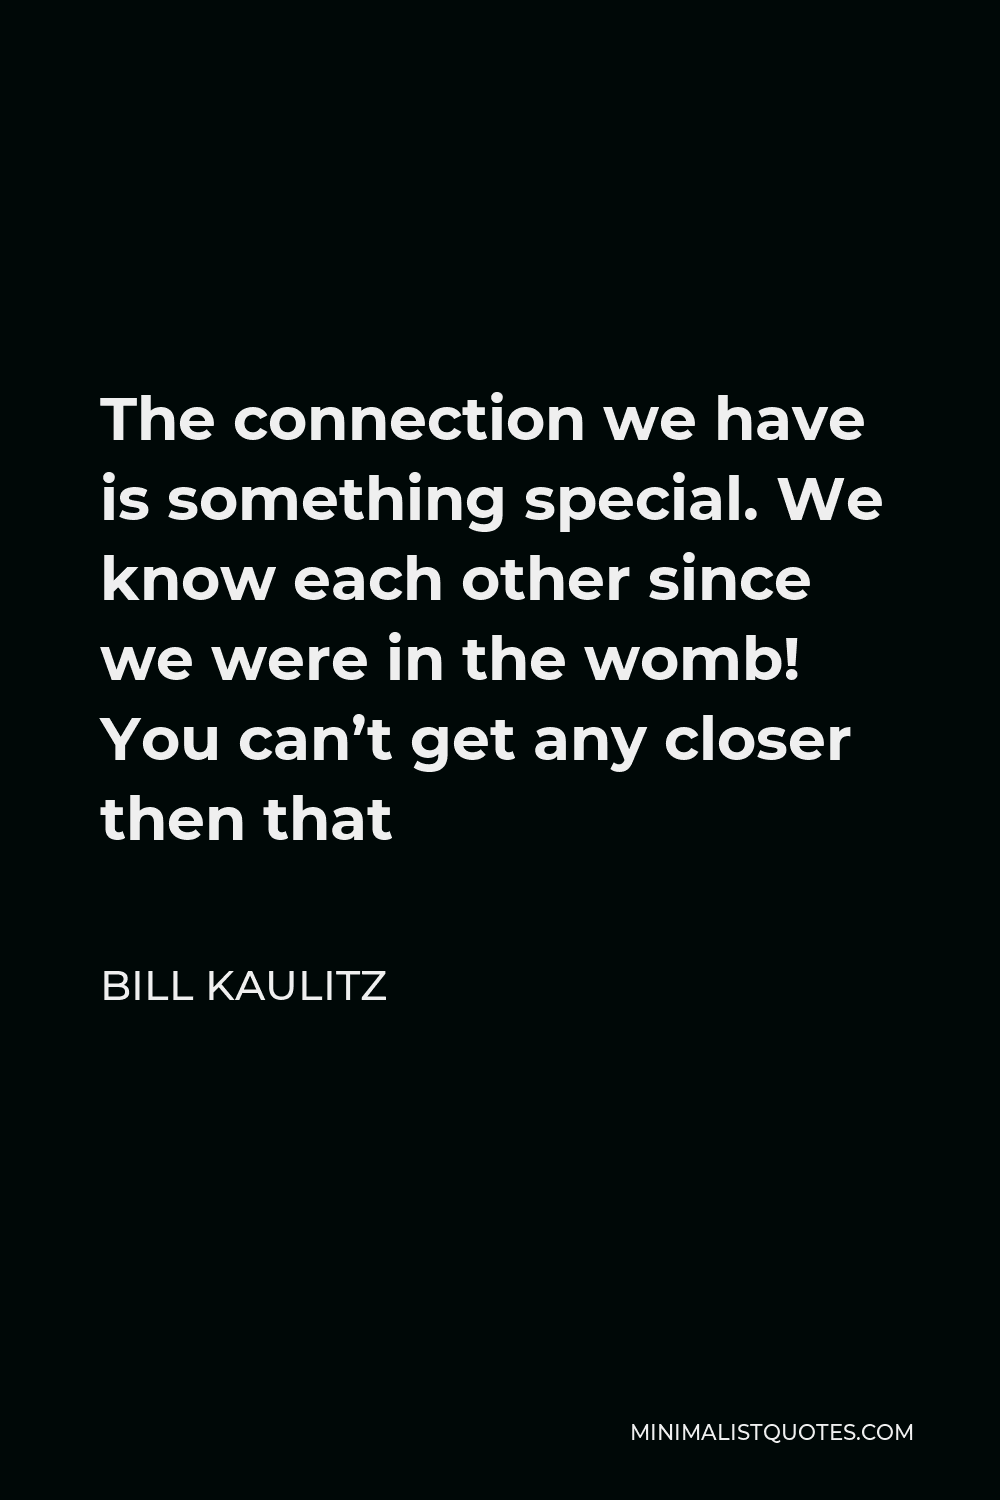 Bill Kaulitz Quote - The connection we have is something special. We know each other since we were in the womb! You can’t get any closer then that